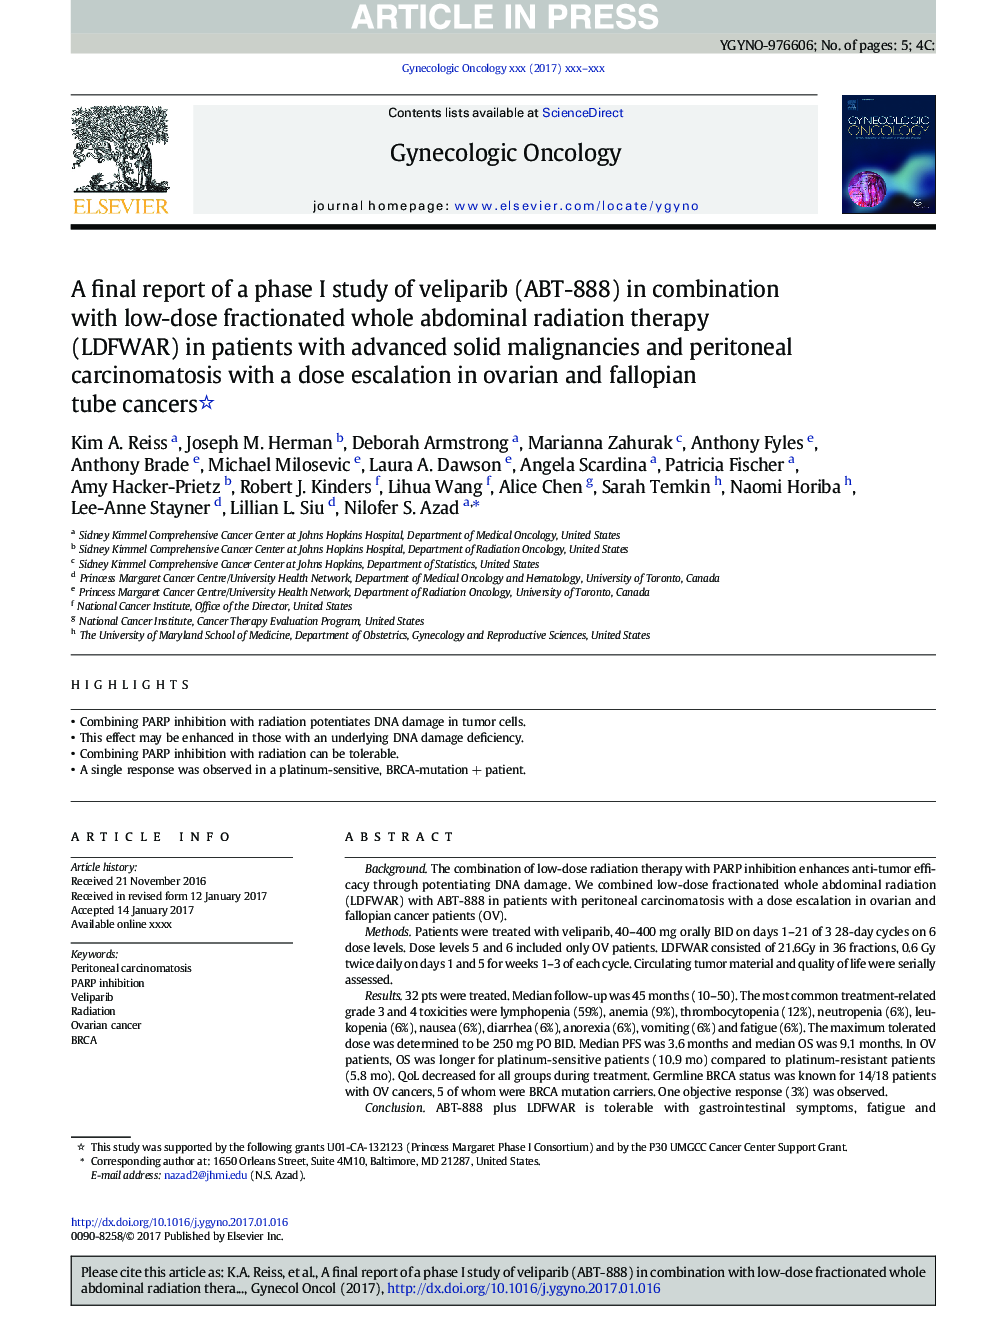 A final report of a phase I study of veliparib (ABT-888) in combination with low-dose fractionated whole abdominal radiation therapy (LDFWAR) in patients with advanced solid malignancies and peritoneal carcinomatosis with a dose escalation in ovarian and 